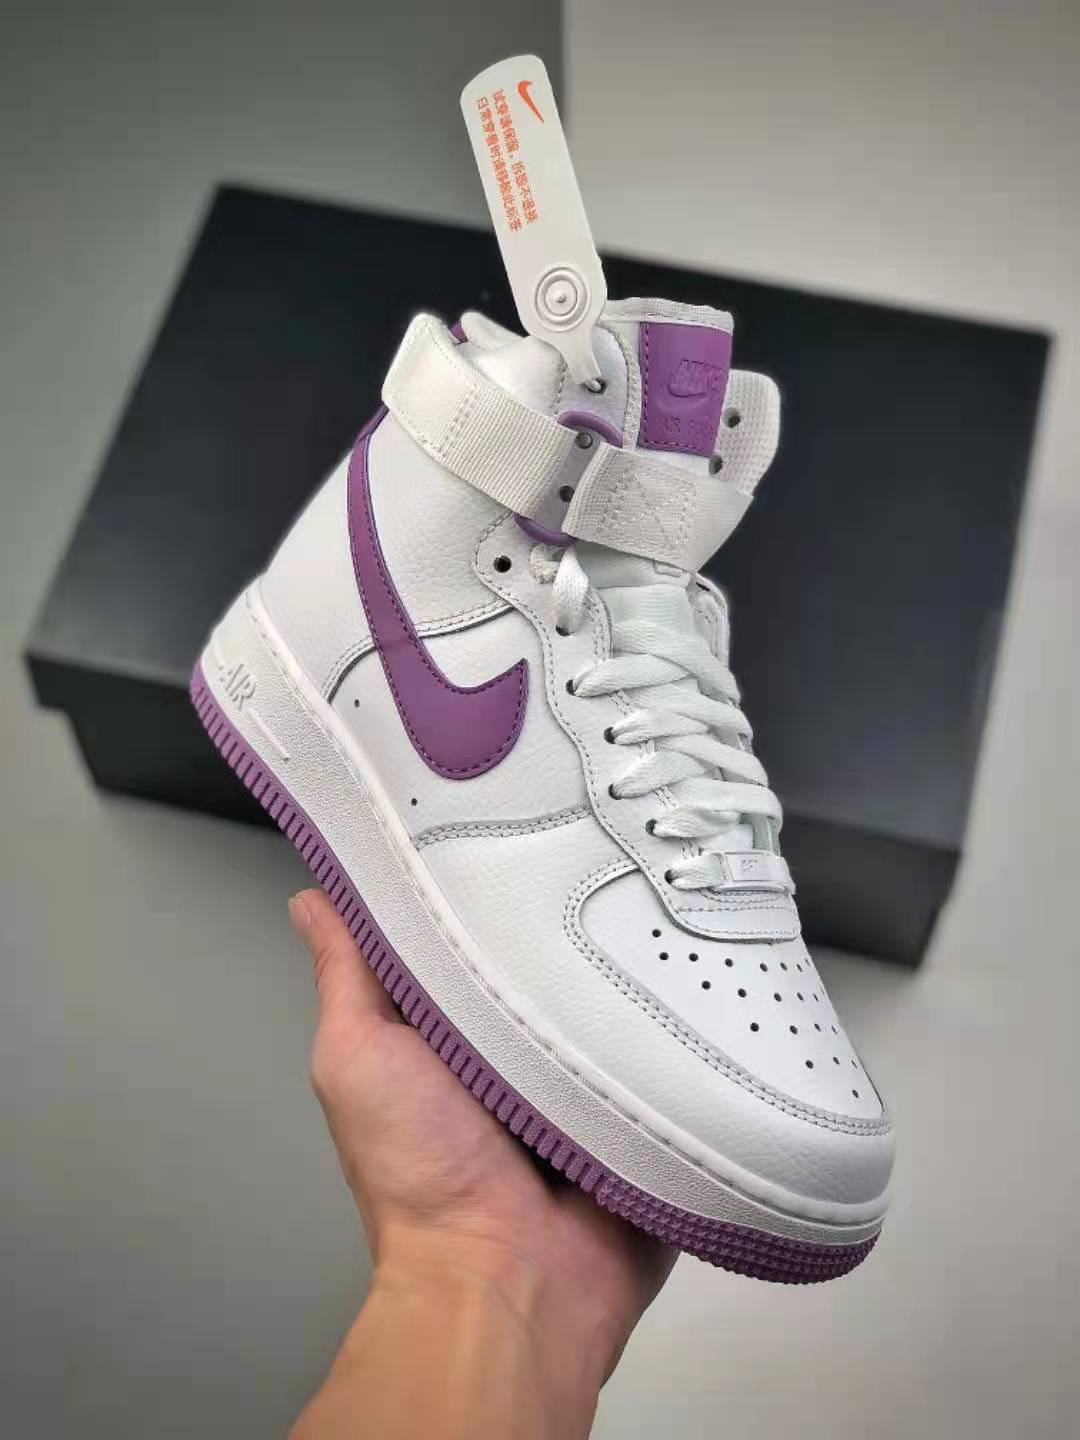 Nike Air Force 1 High 'White Dark Orchid' 334031-112 - Stylish and Classic Sneakers